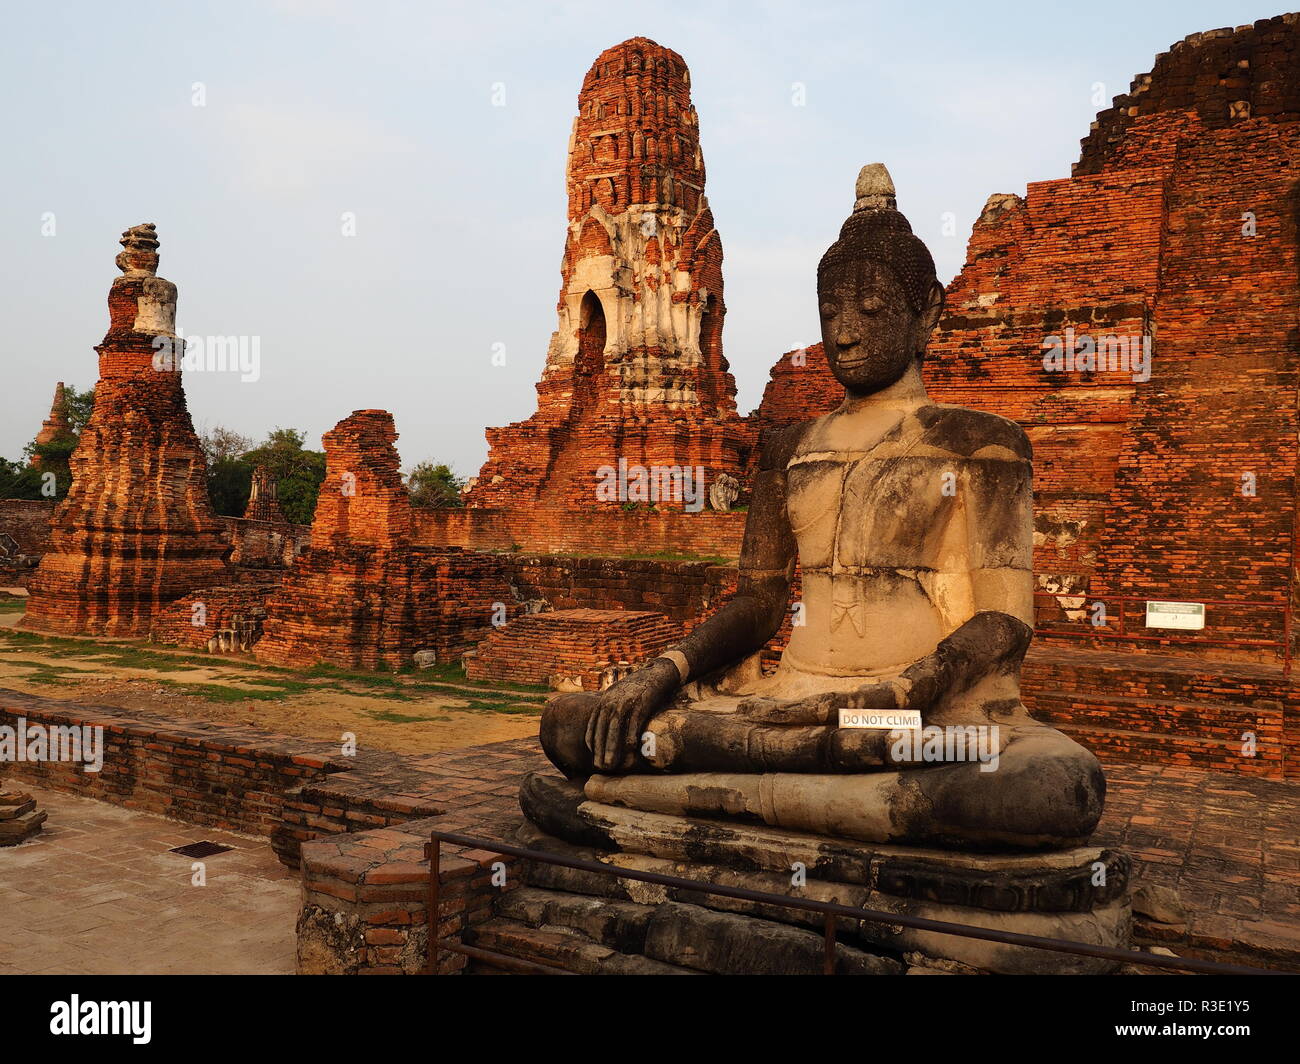 Seated Buddha and Wat Mahathat temple in Ayutthaya Stock Photo